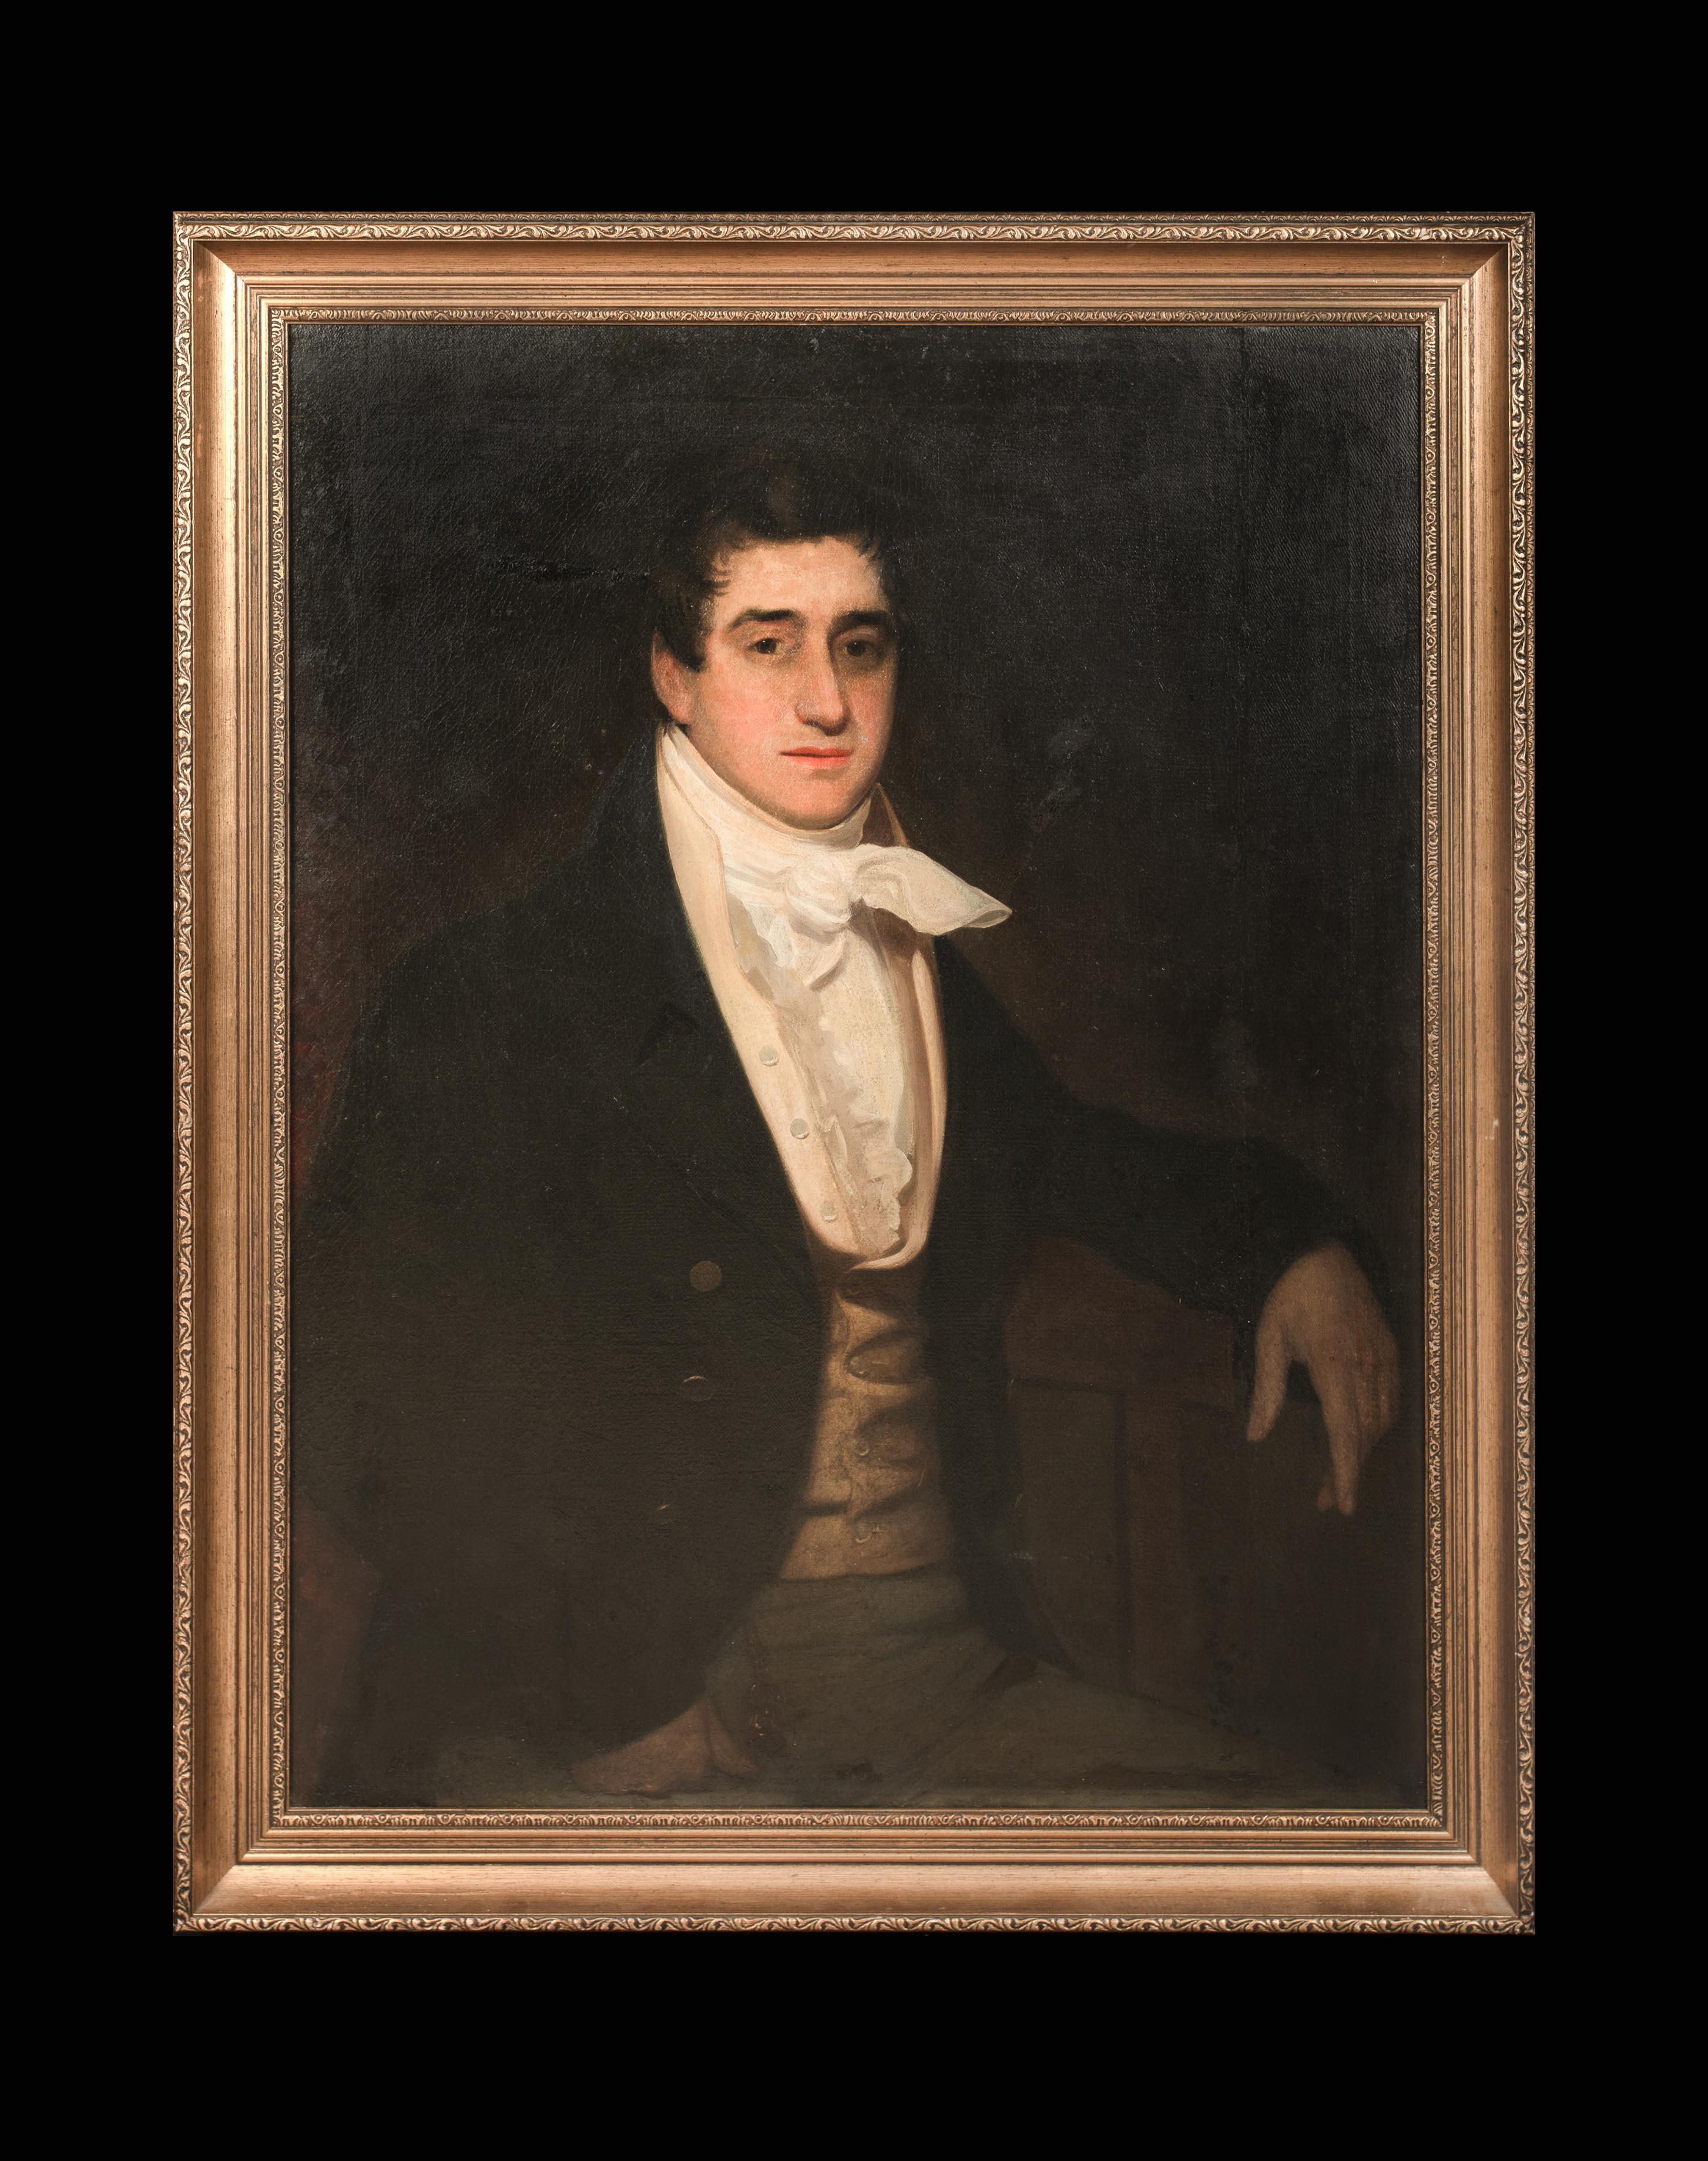 Portrait of Lord Napier - William John Napier (1786-1834)   - Painting by Thomas Lawrence